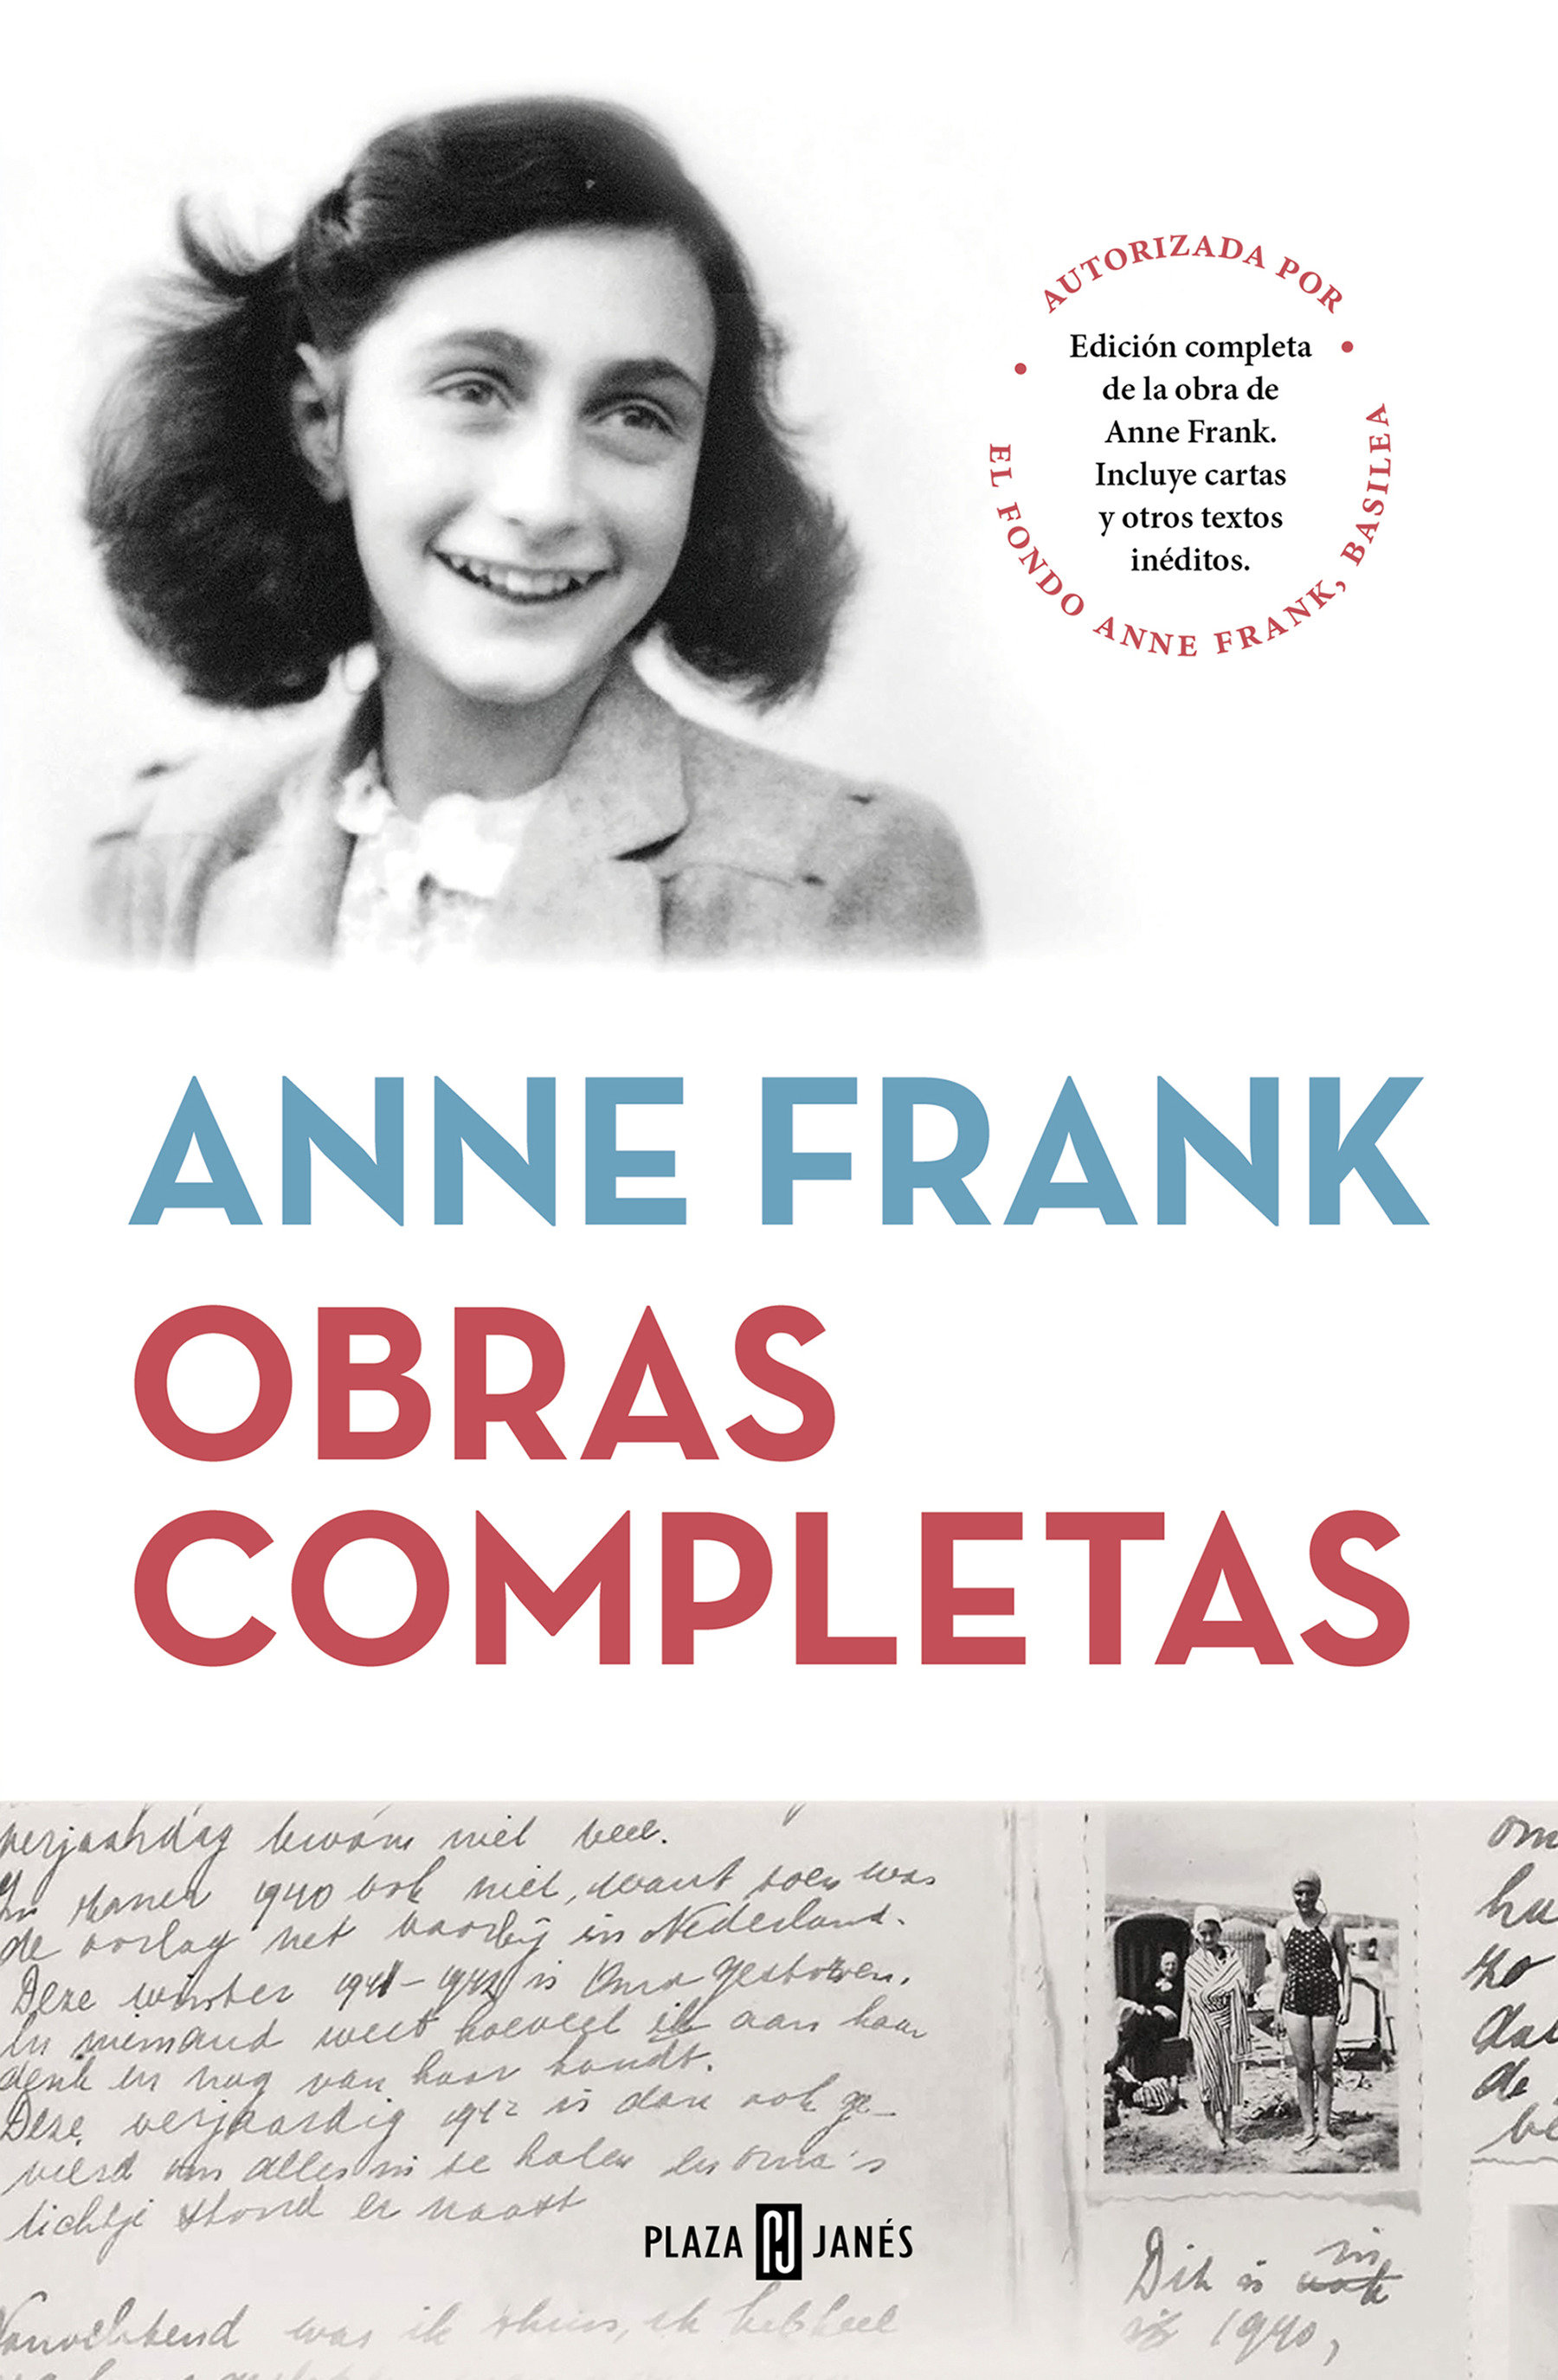 Obras Completas (Anne Frank) / Anne Frank: The Collected Works (Hardcover Book)